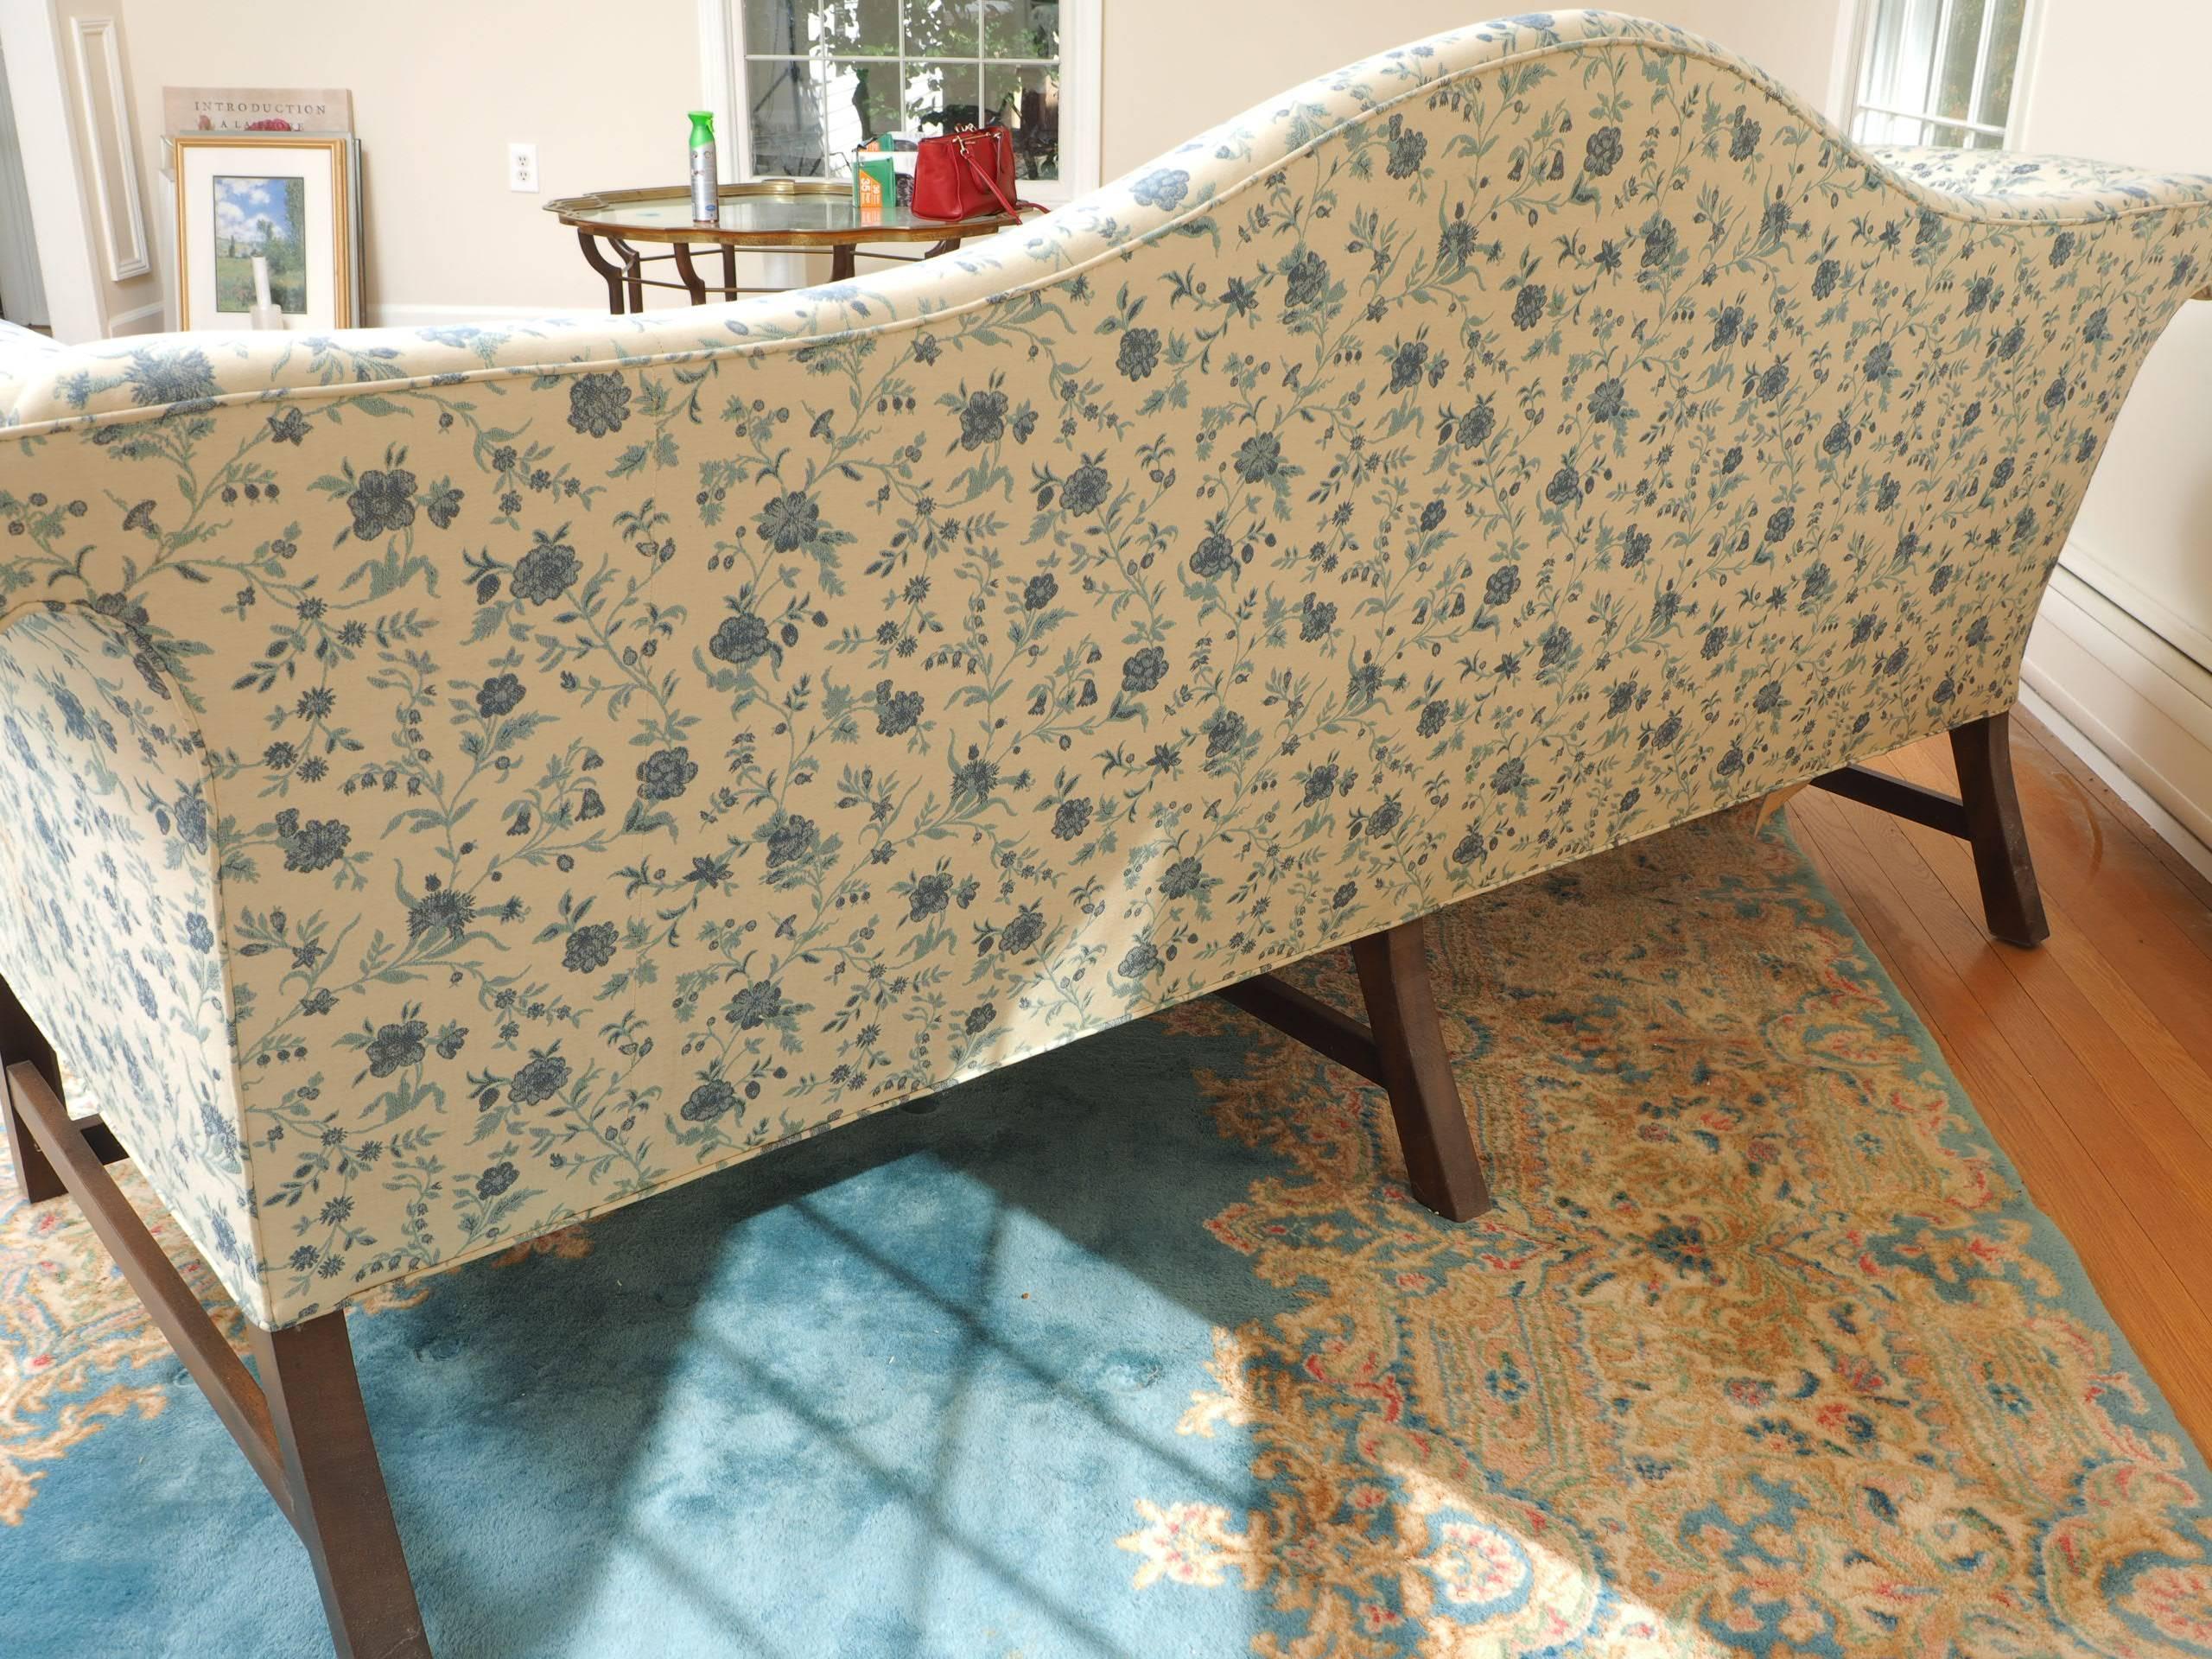 George III style with scrolled arms, square front legs and square splayed back legs with an H stretcher. Upholstered in a blue on cream floral print. 
Condition: good, some stains to upholstery, some wrinkling to the tops of the arms.